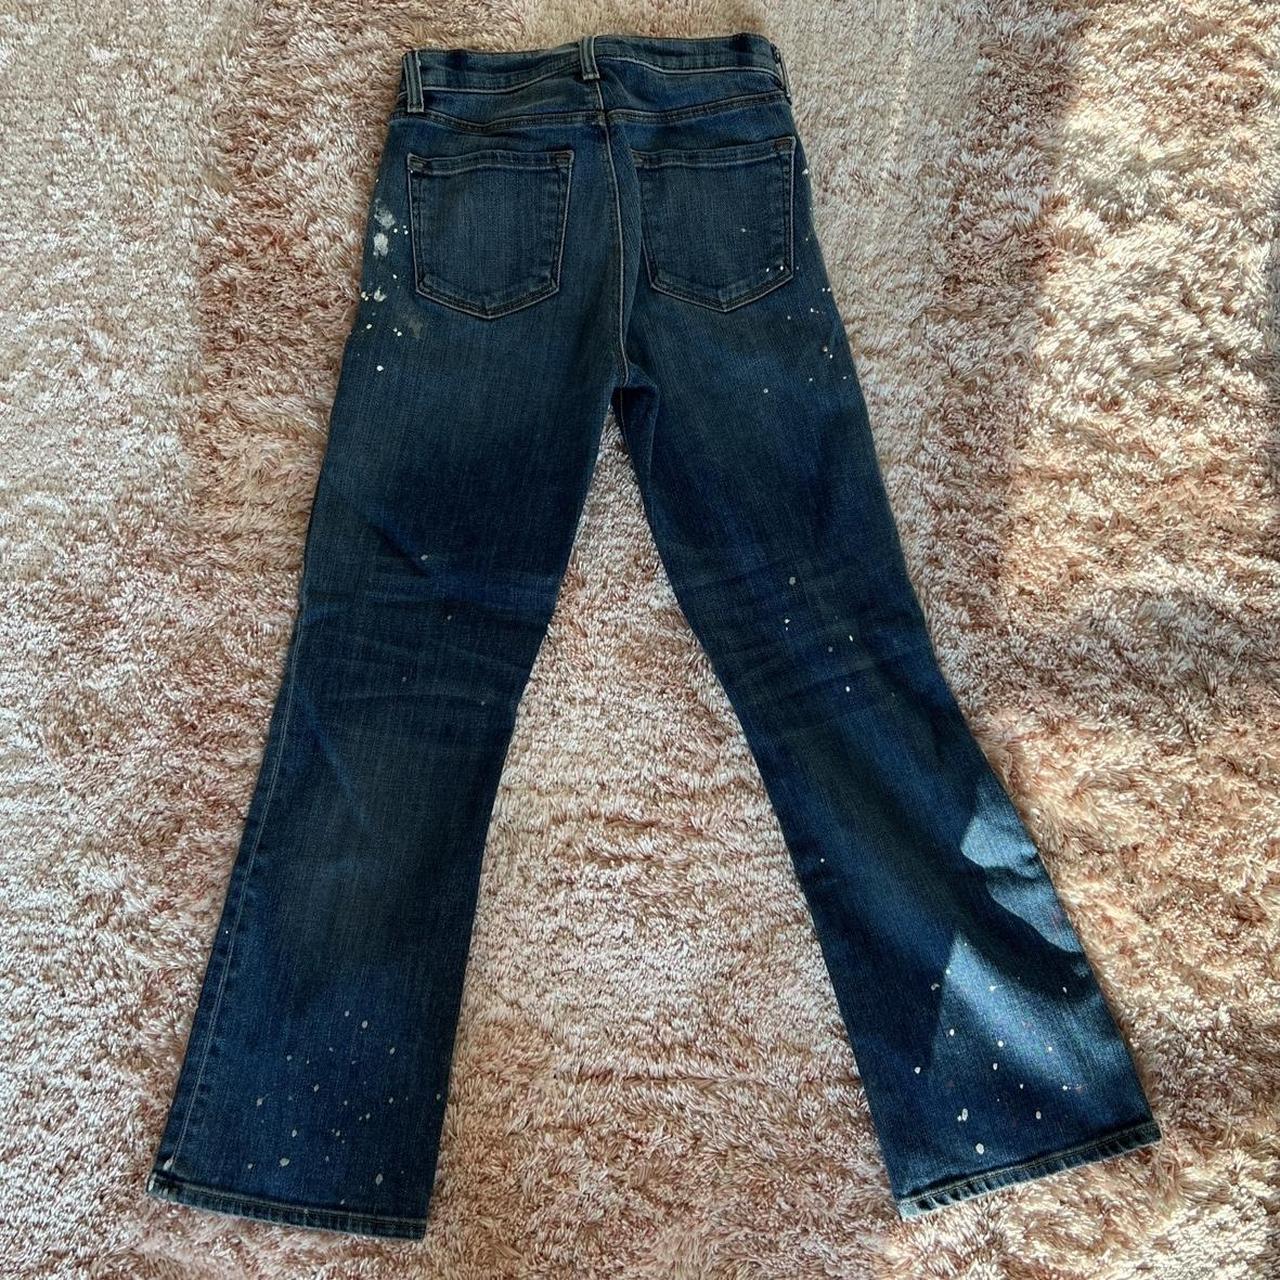 J BRAND PAINTED JEANS. , Low to mid rise, size 26.